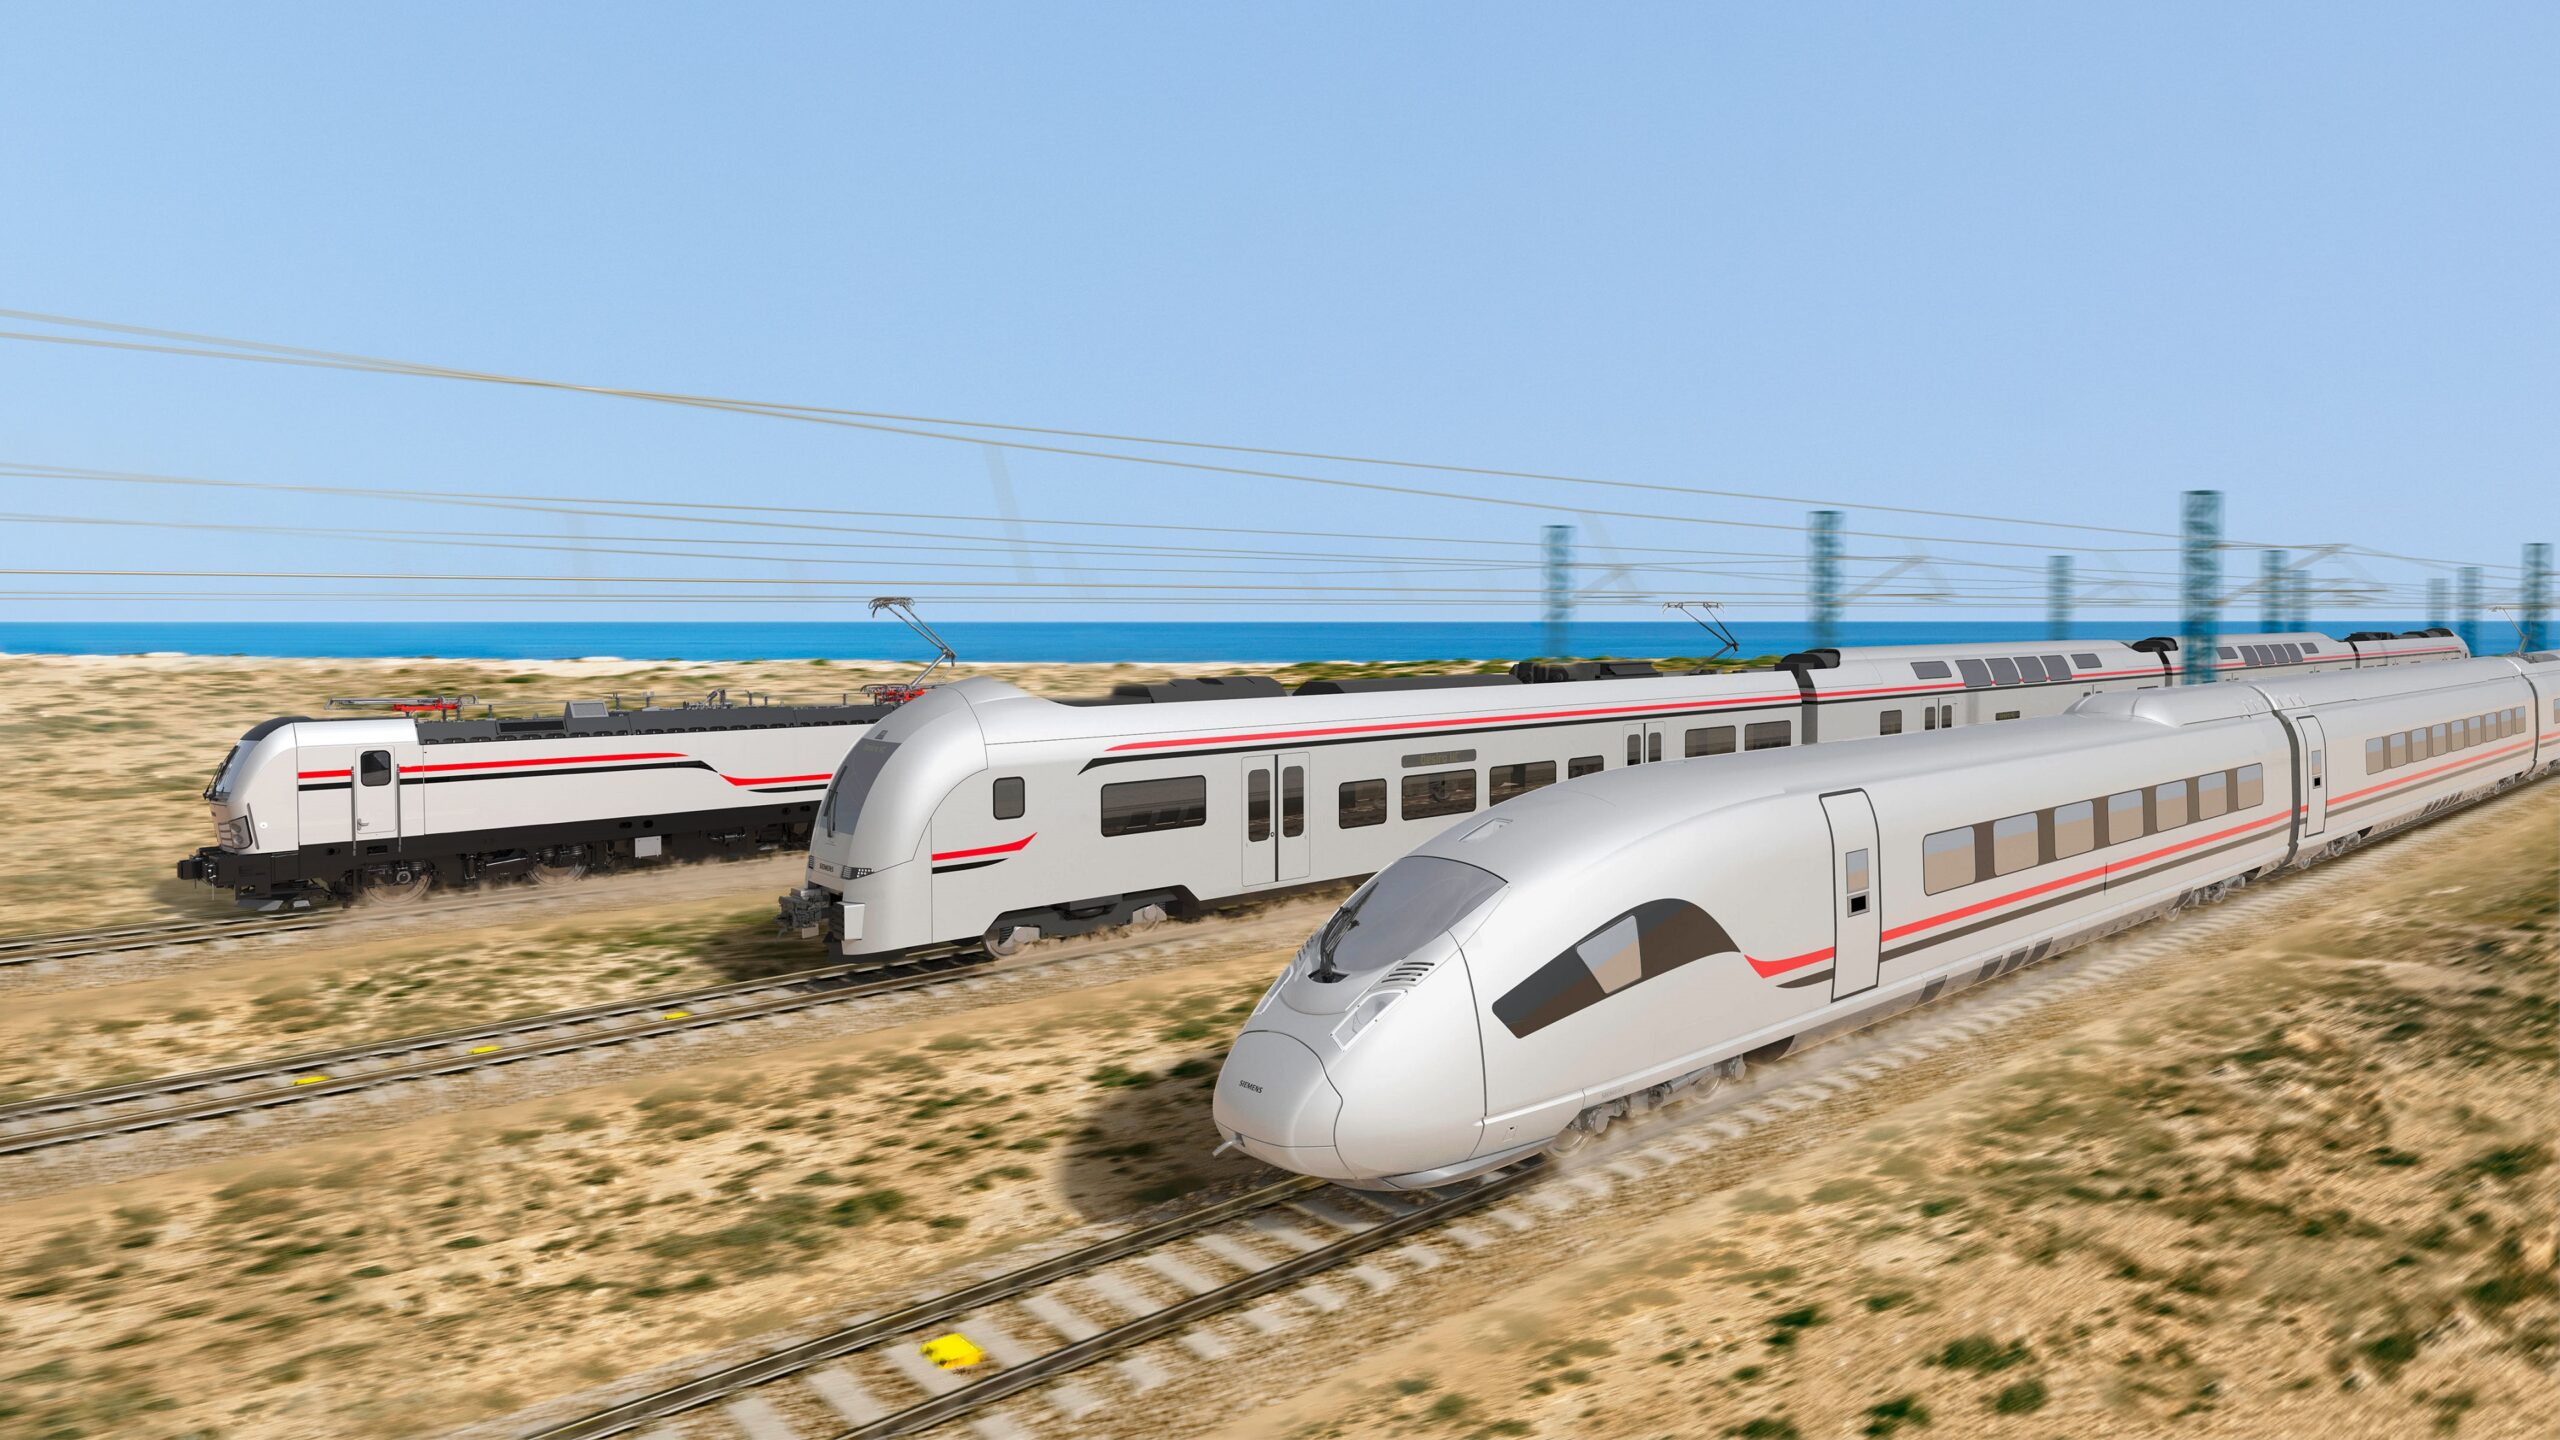 Render of the Vectron electric locomotive, Desiro High Capacity and Velaro trains for Egypt's first high-speed line